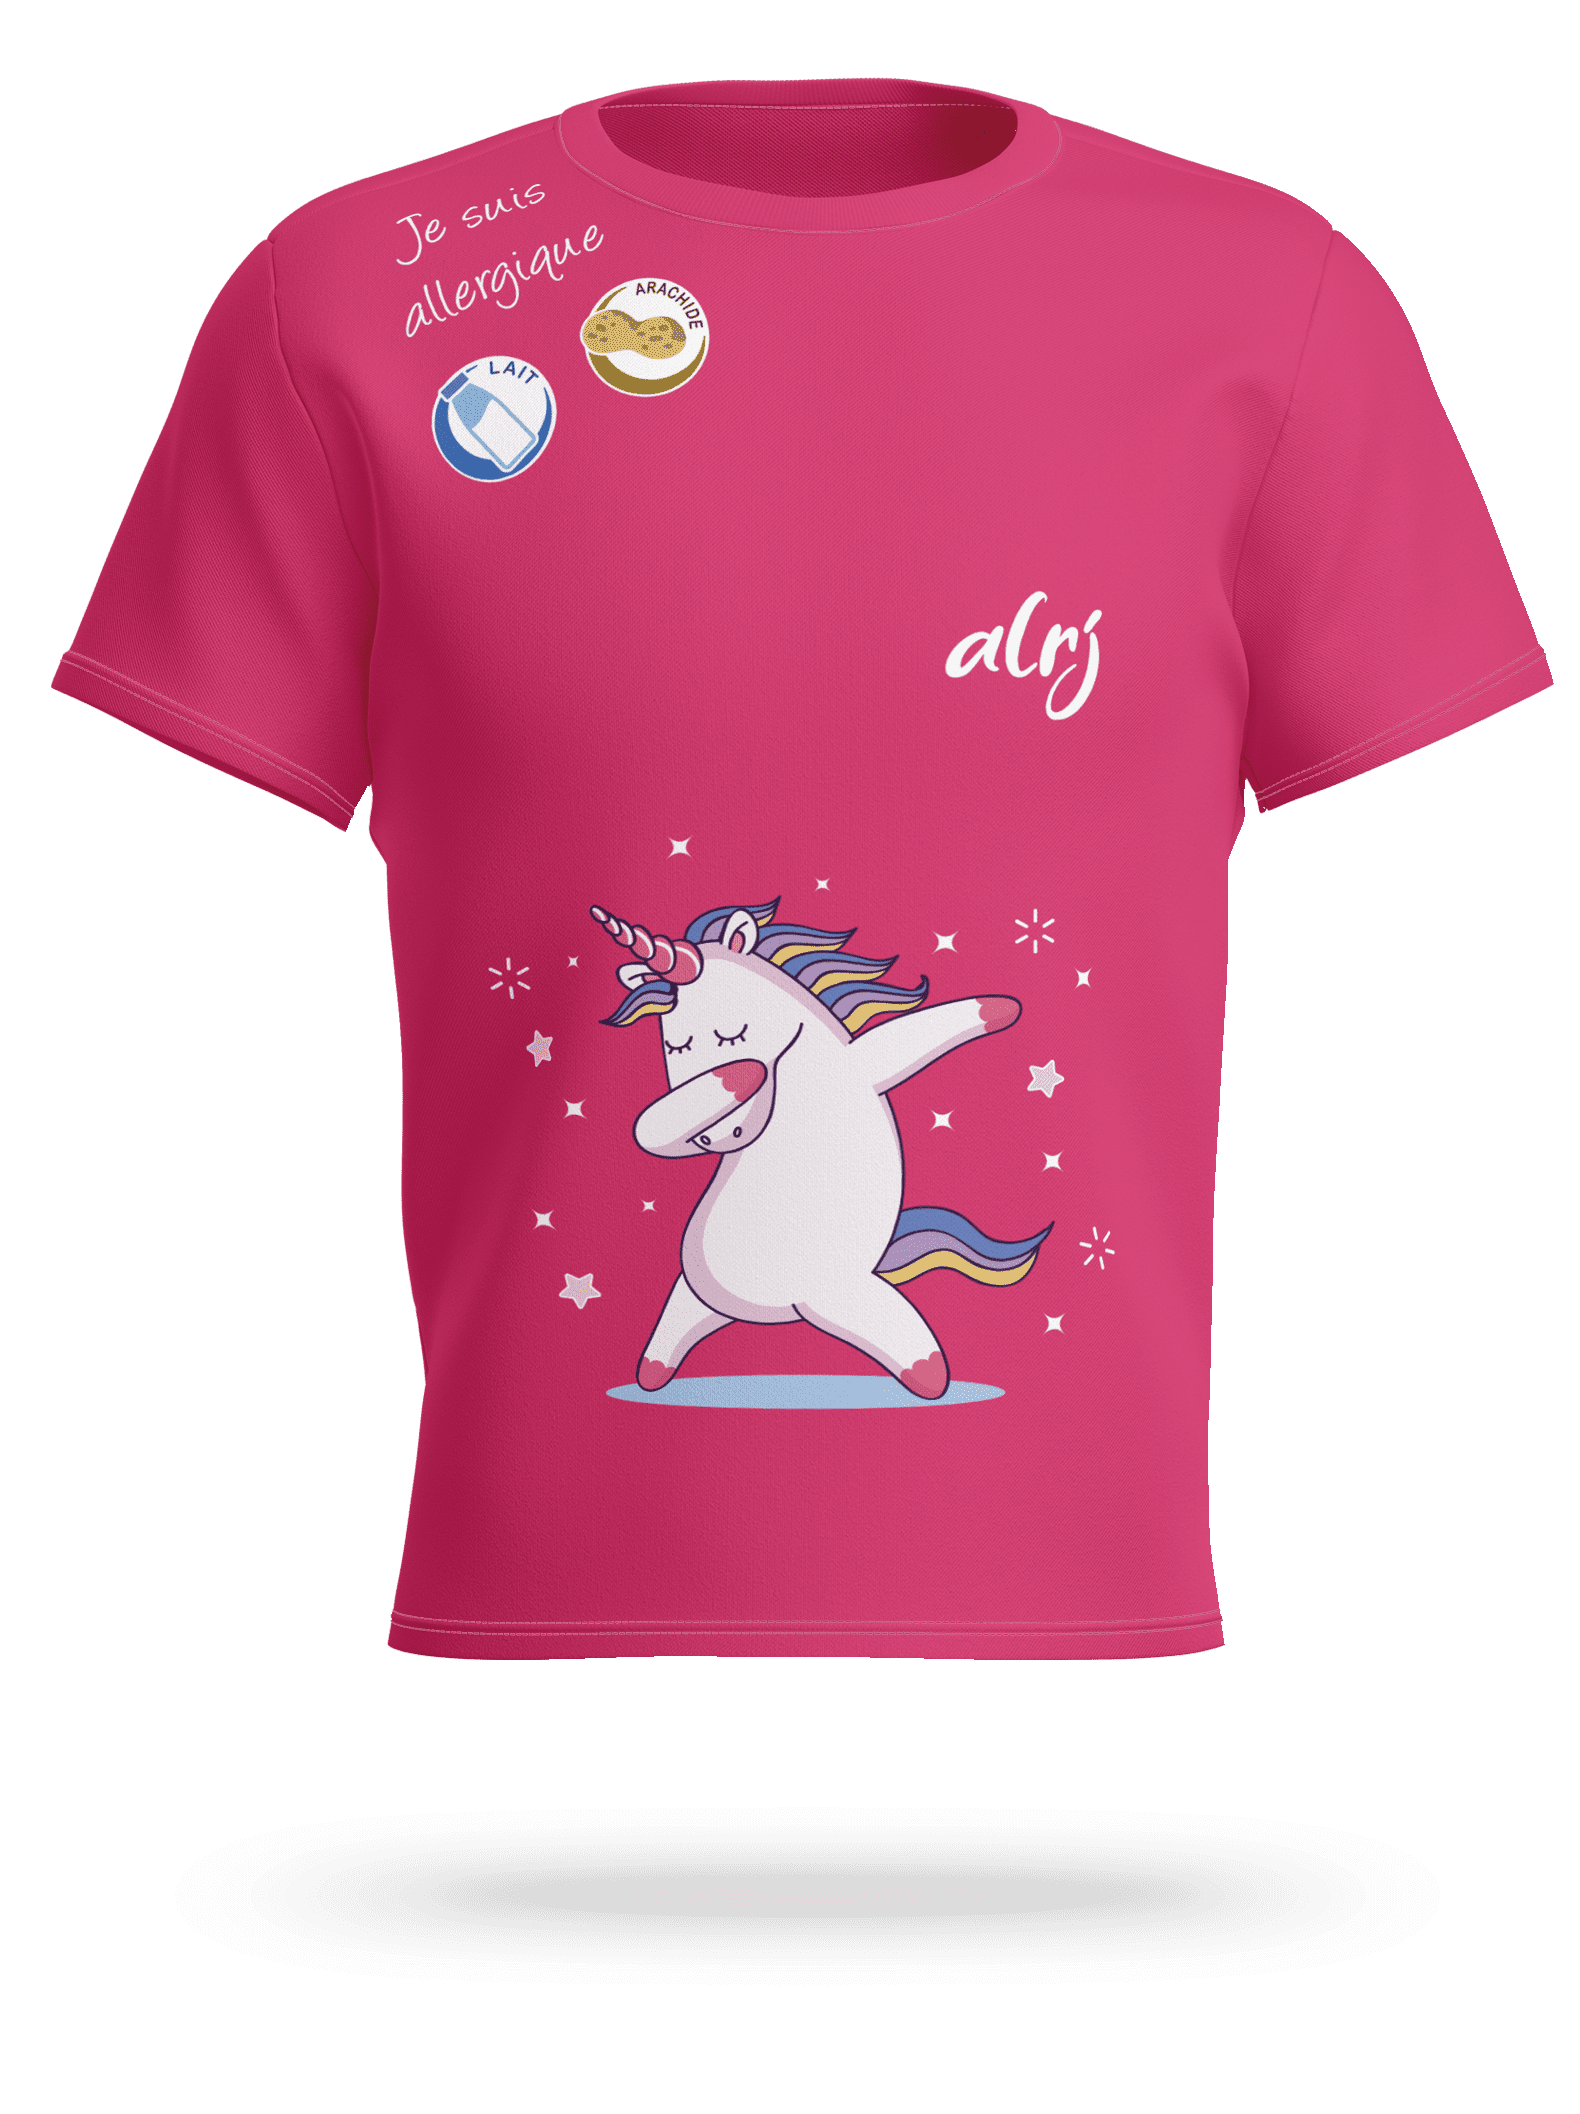 t-shirt alrj allergies alimentaires licorne